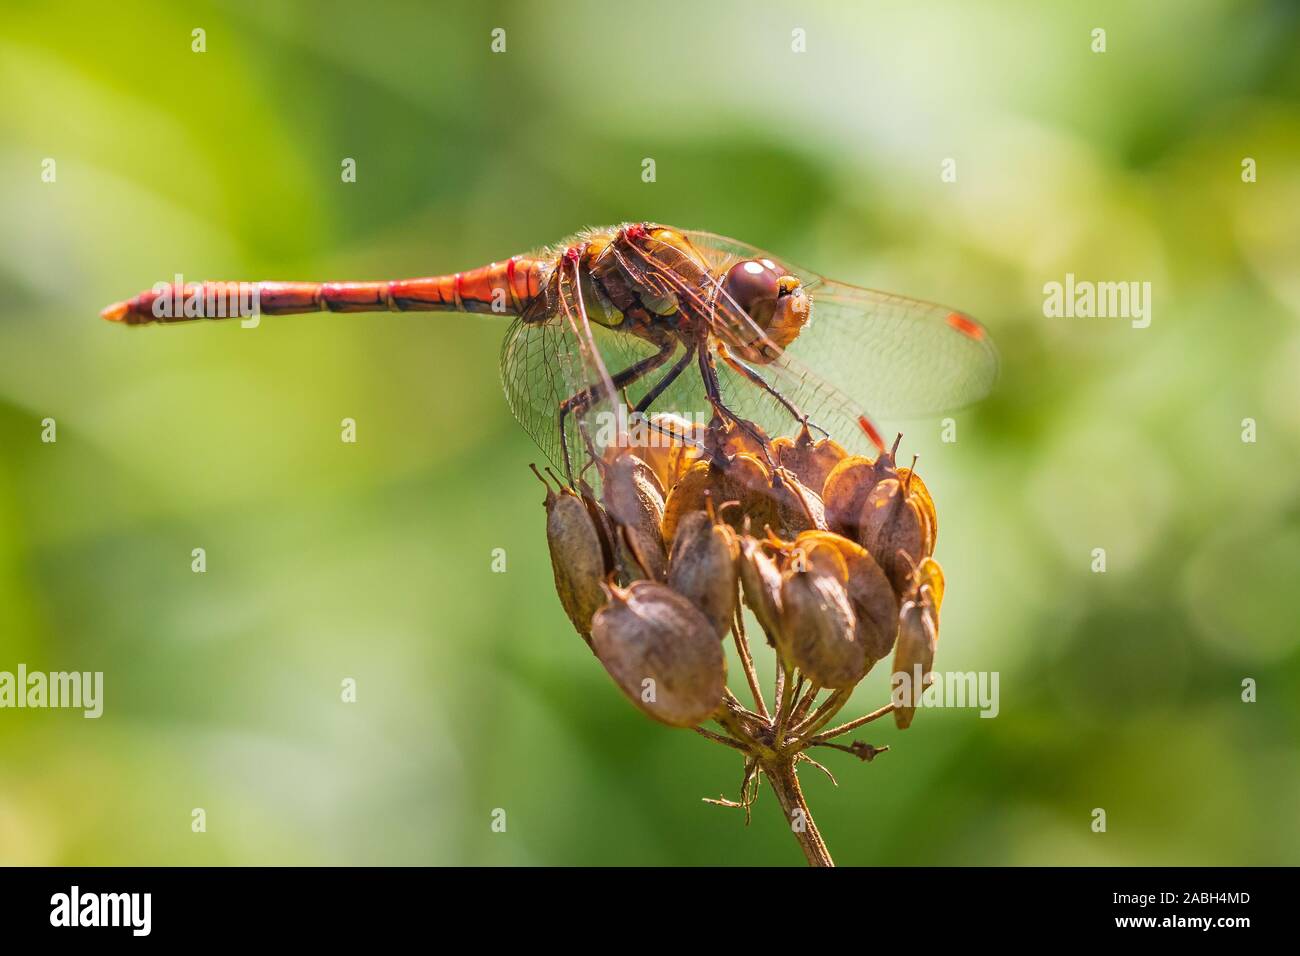 Sympetrum striolatum Common Darter wings spread he is drying his wings in the early, warm sun light Stock Photo